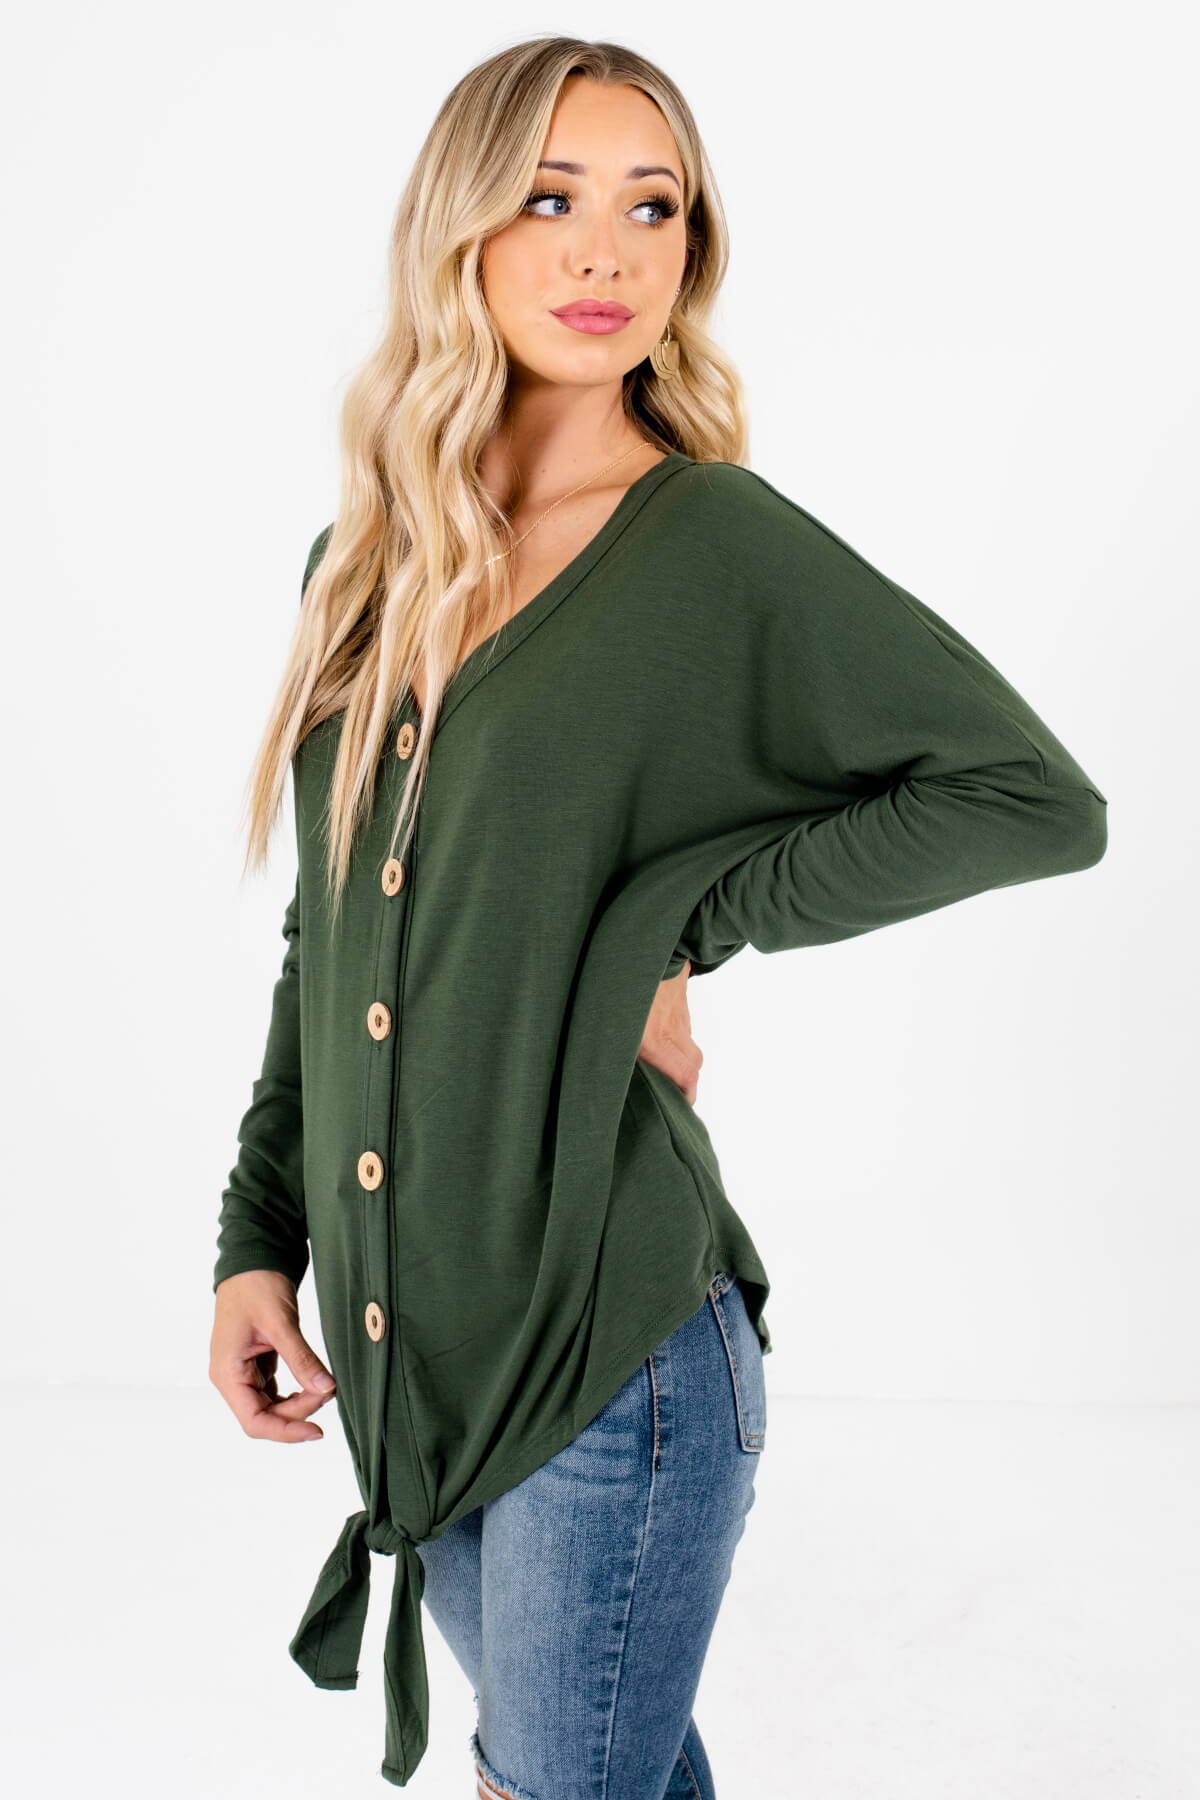 Olive Green Cute and Comfortable Boutique Tops for Women